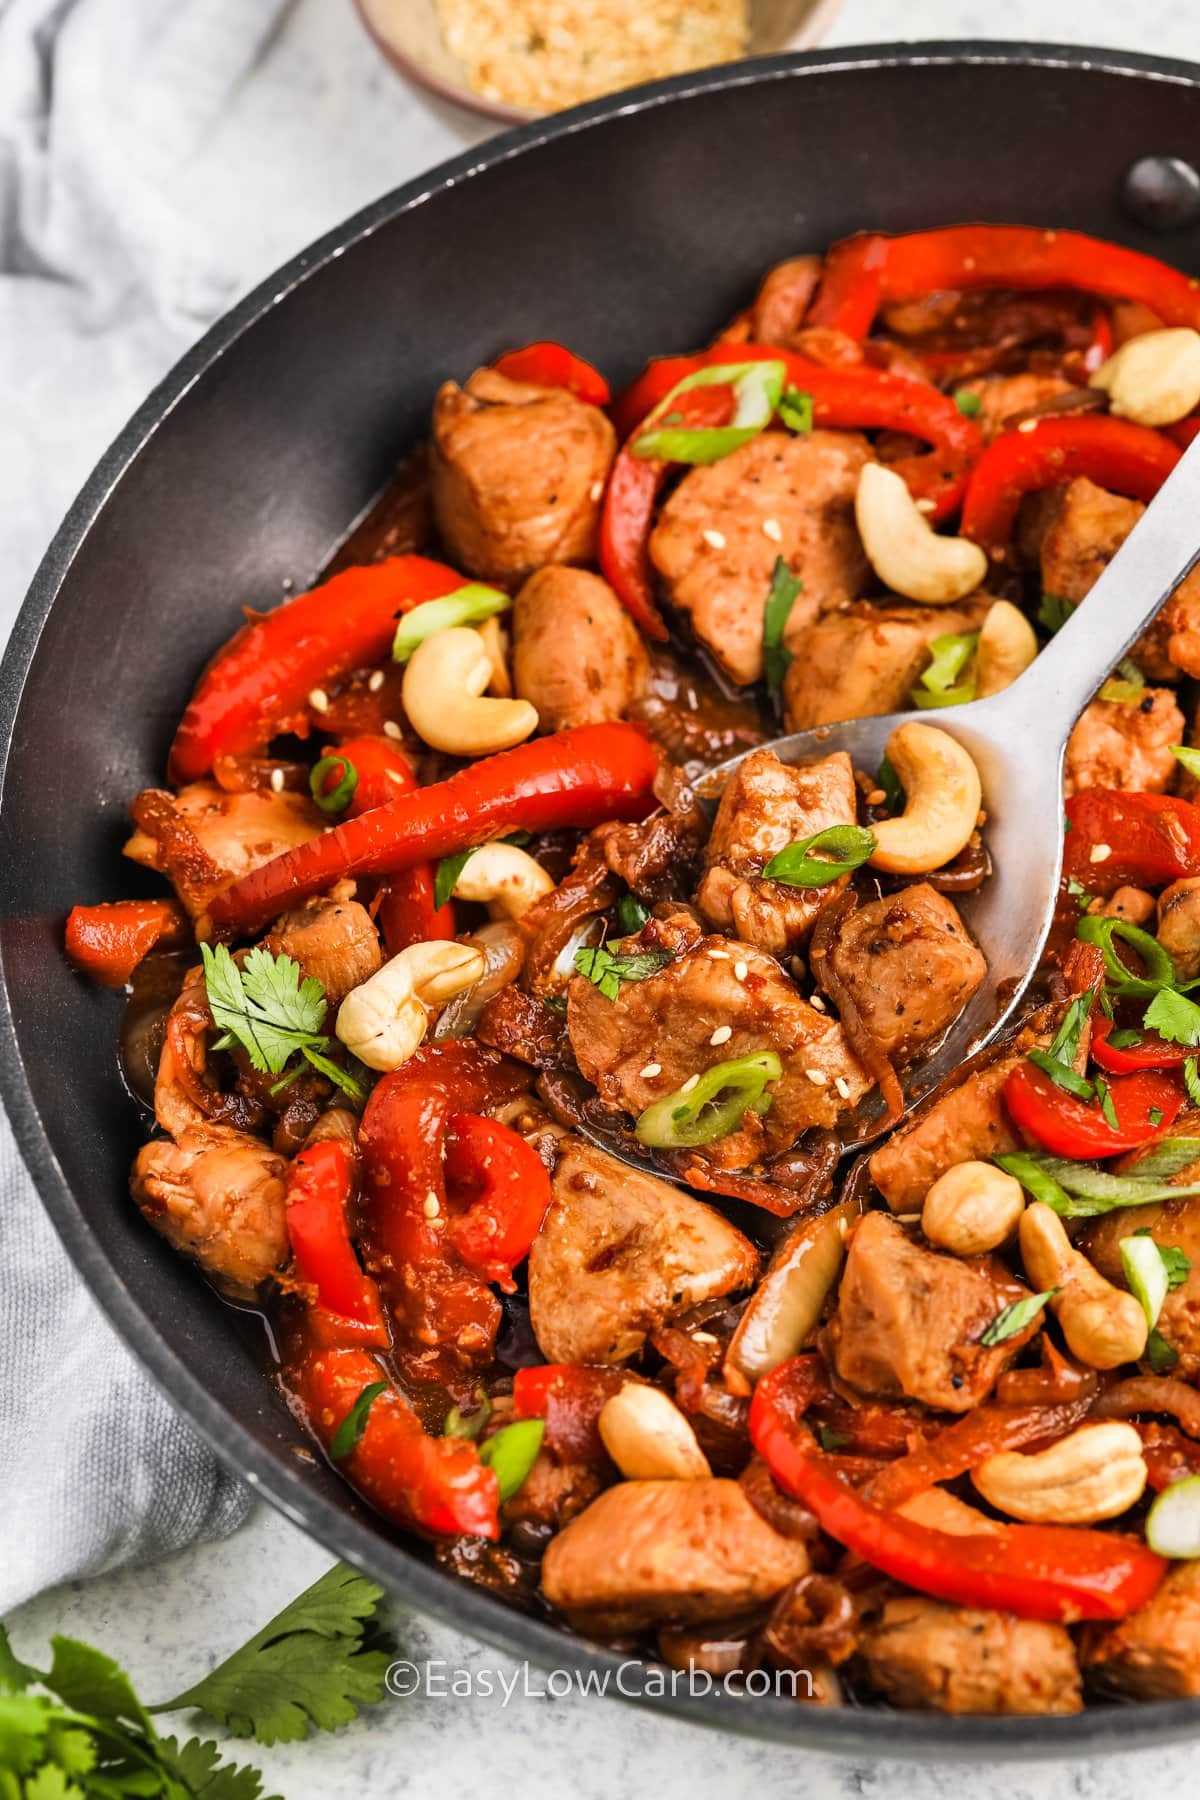 Take a spoonful of Cashew Chicken Recipe out of the pan